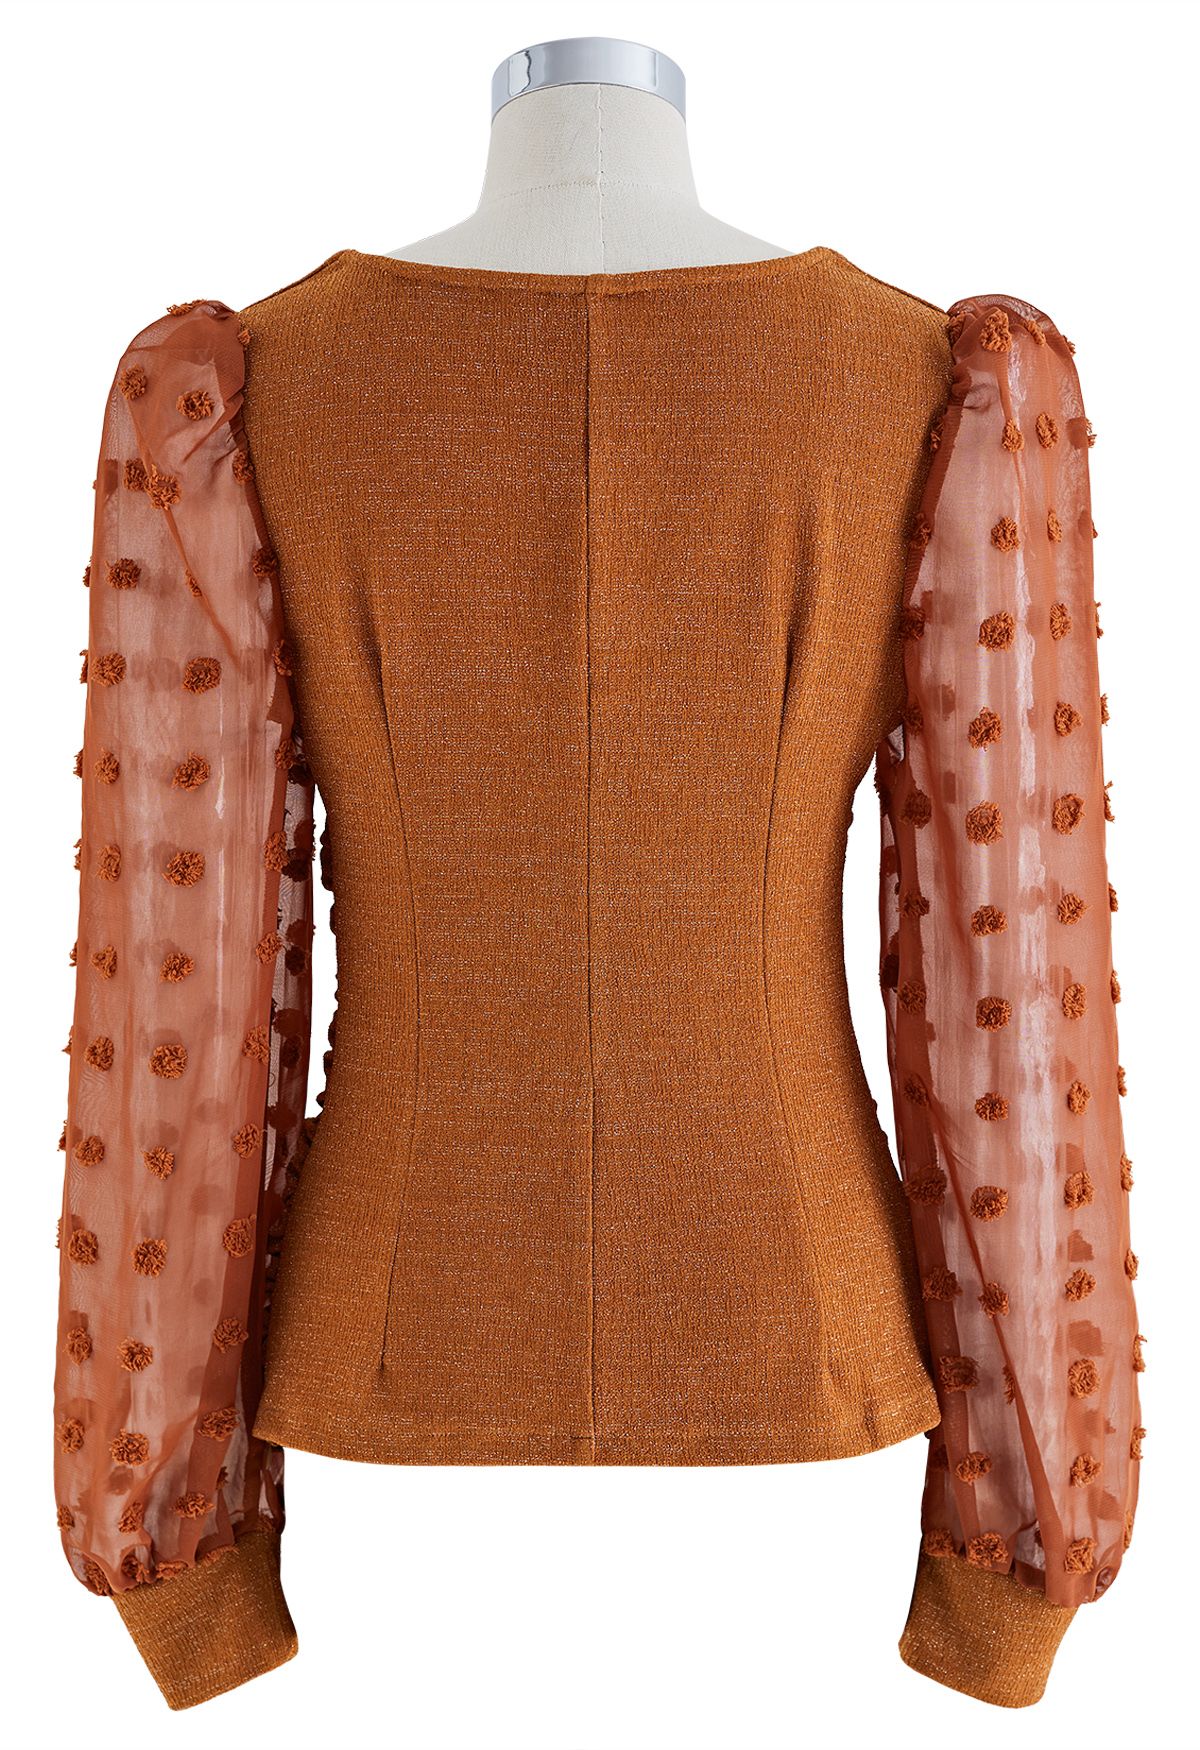 Sweetheart Neck Ruched Spliced Shimmer Top in Pumpkin